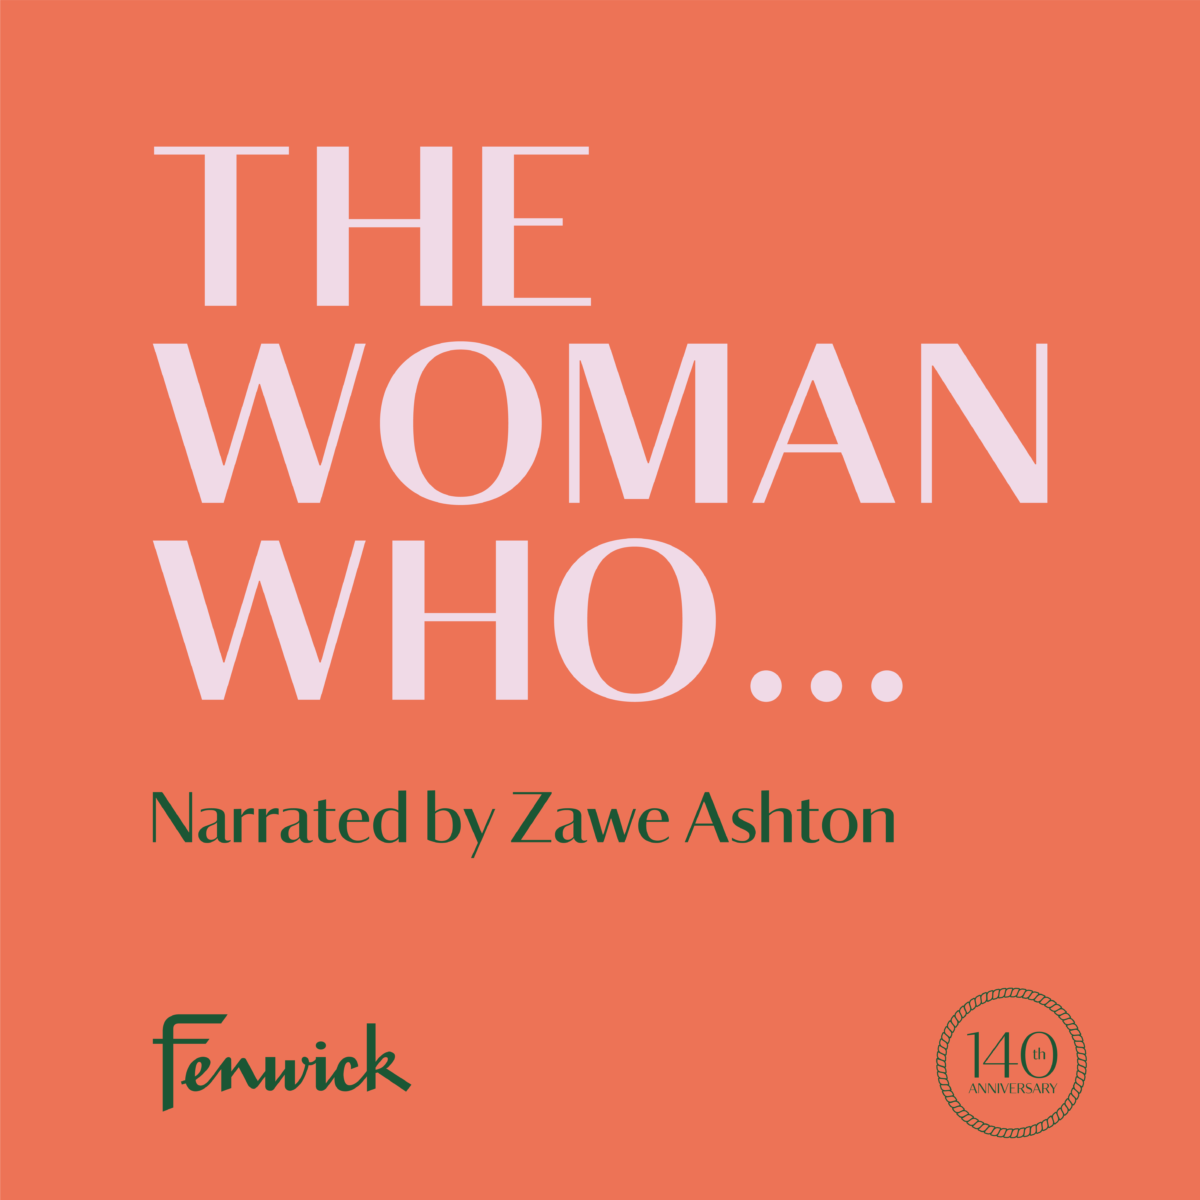 The Woman Who Fenwick podcast